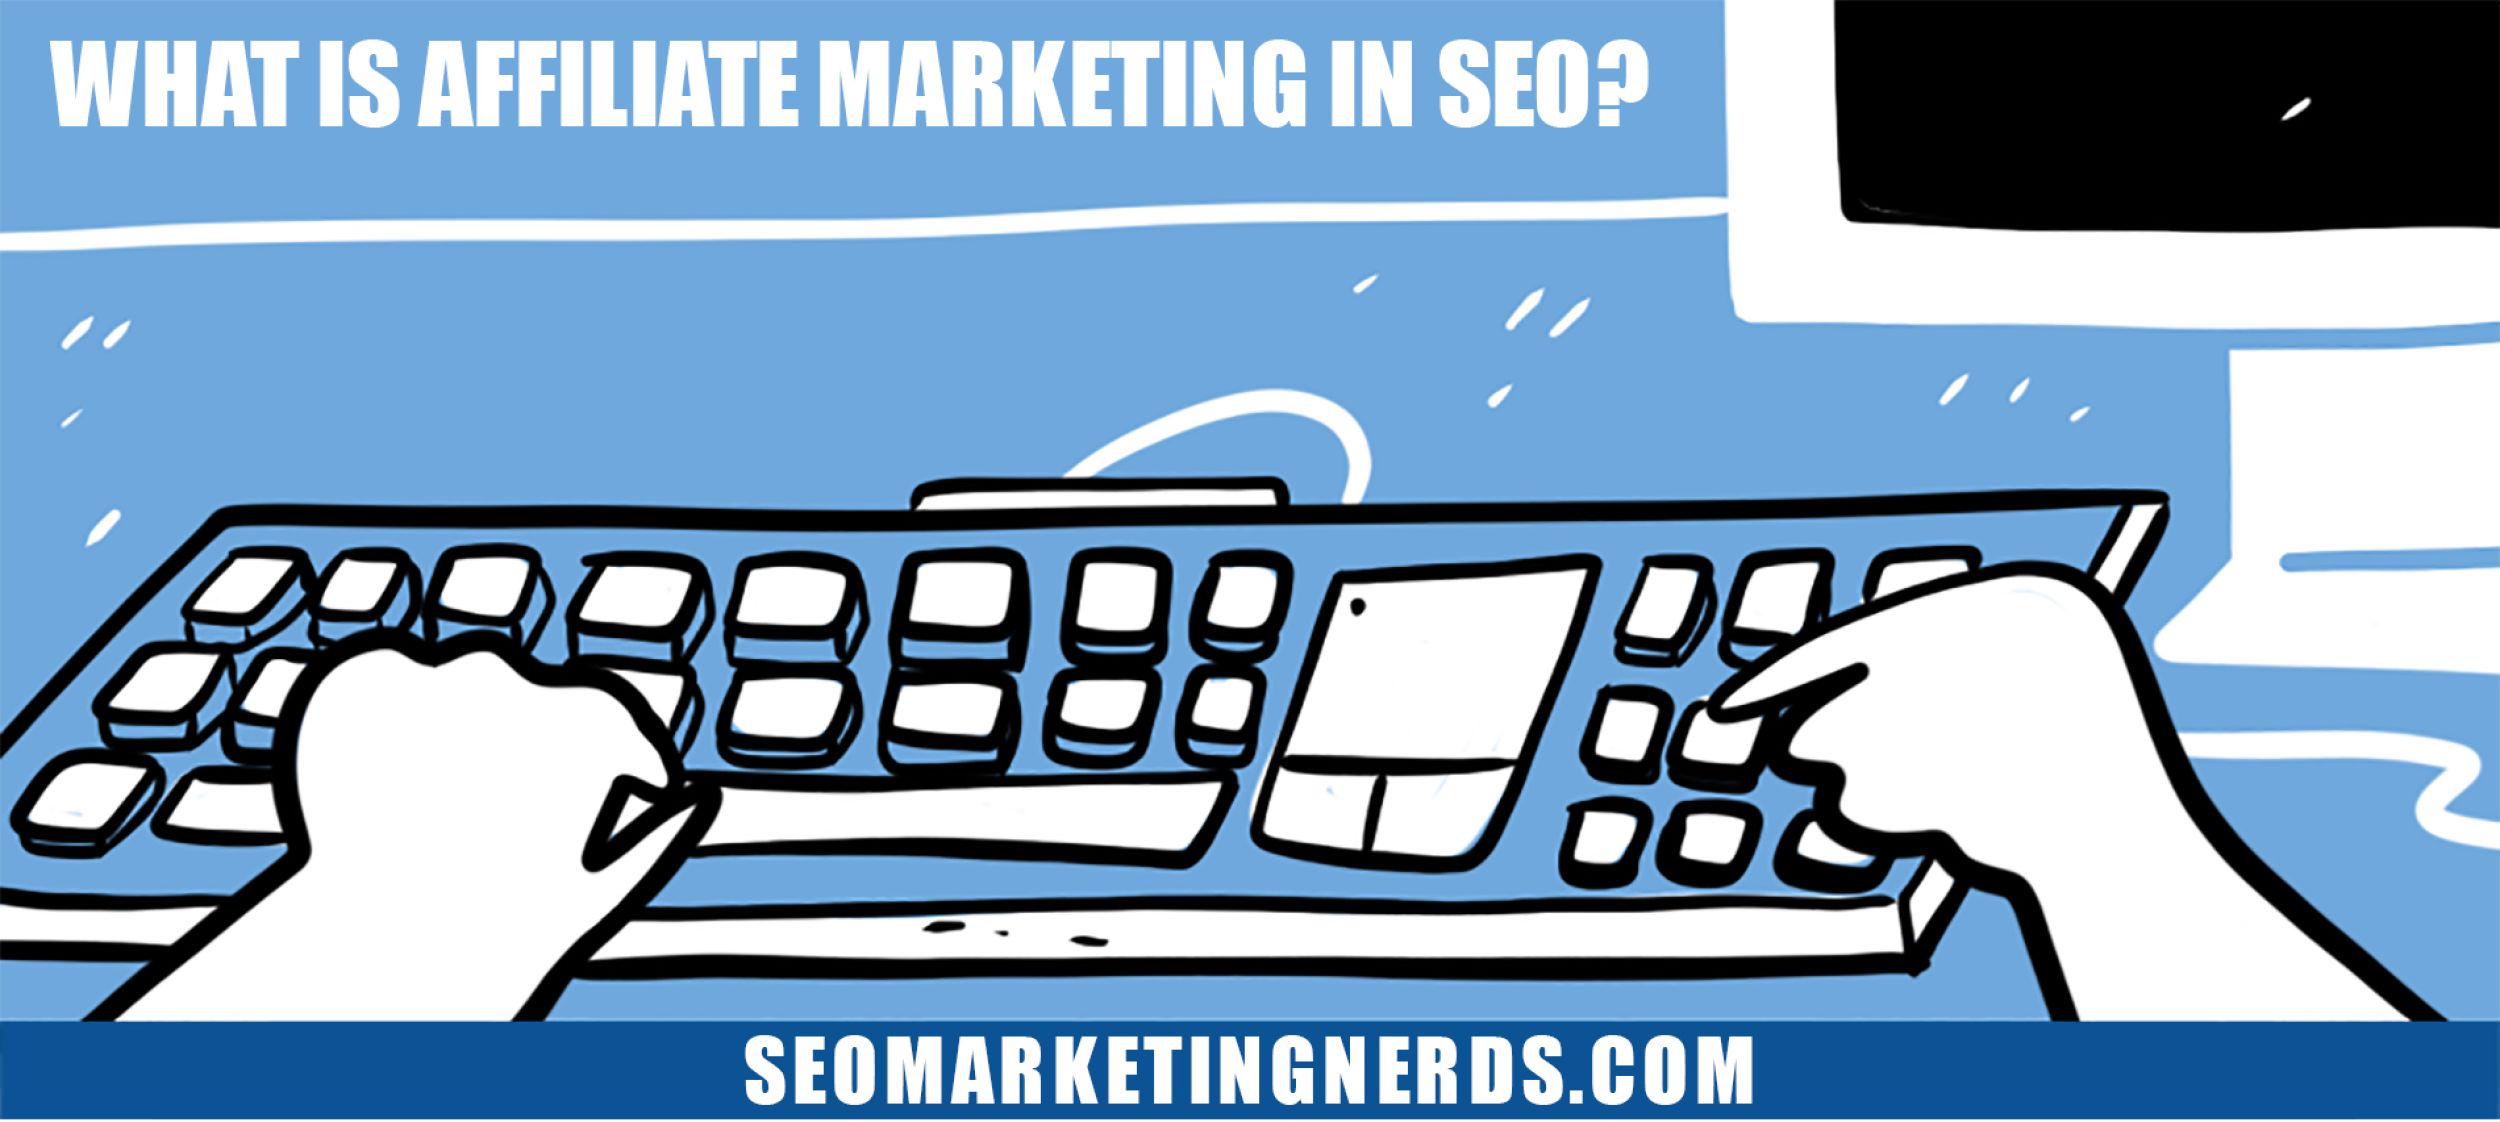 What is affiliate marketing in SEO?